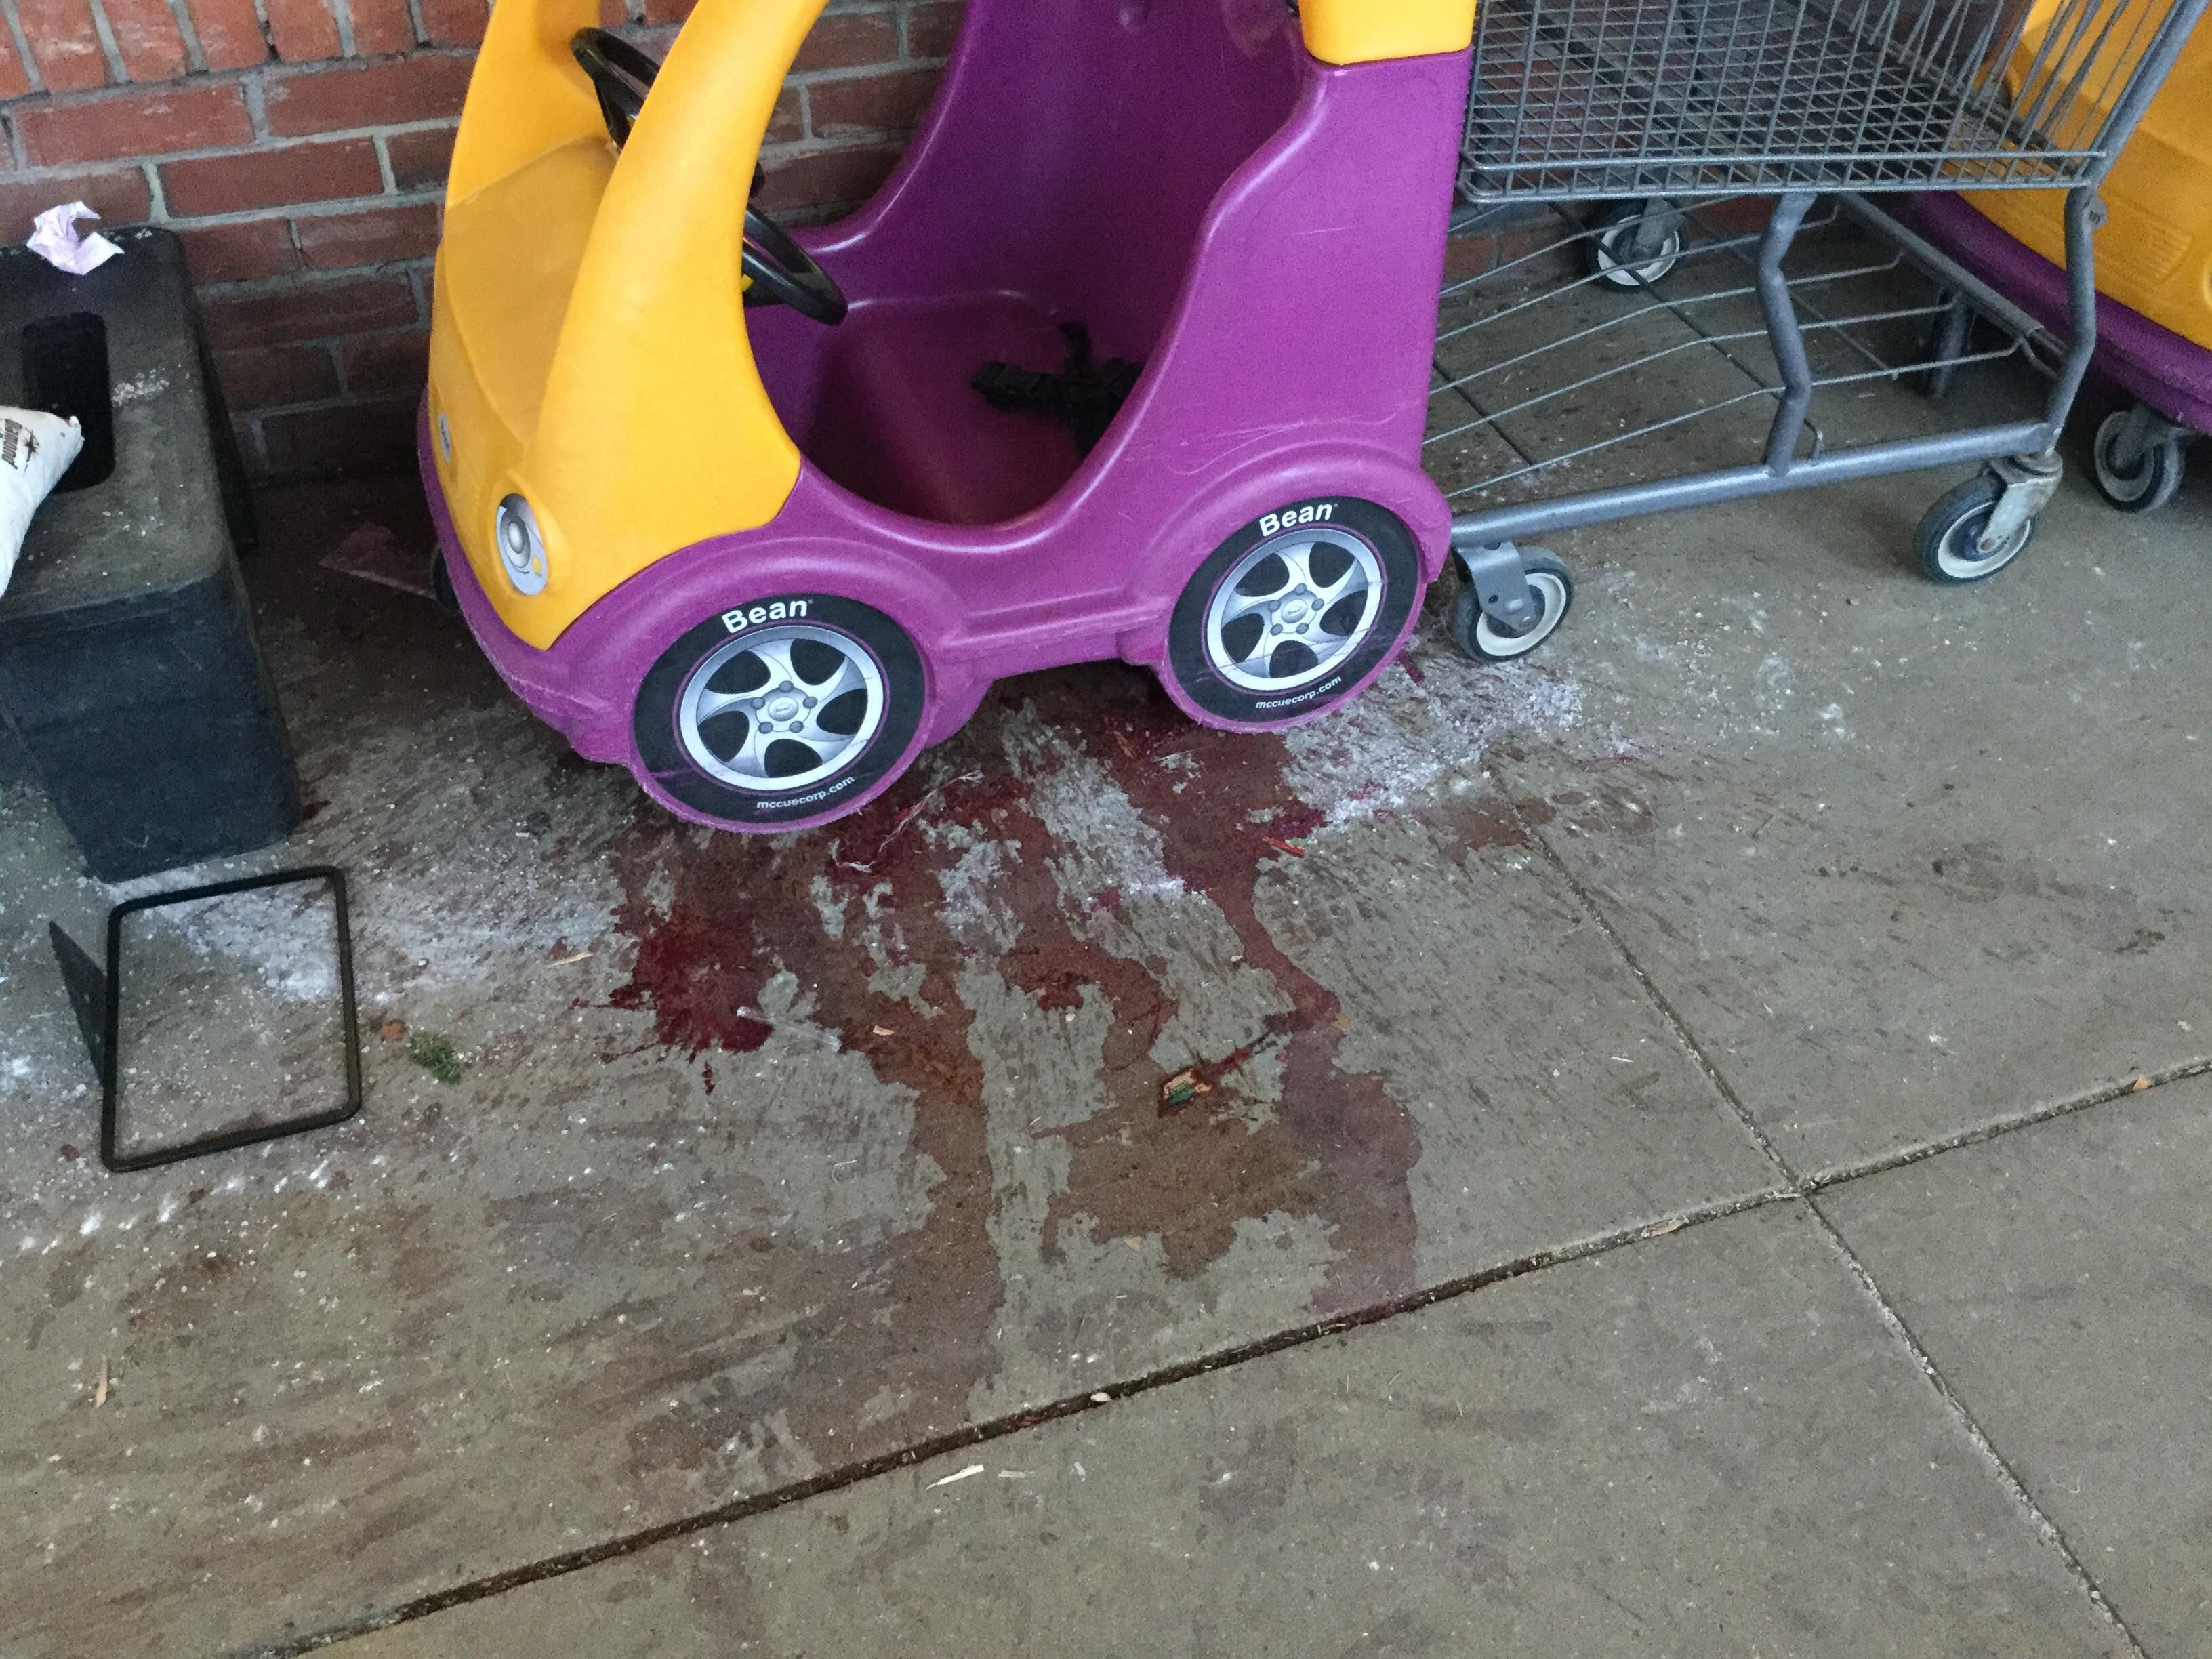 Looks like someone ran over a toddler